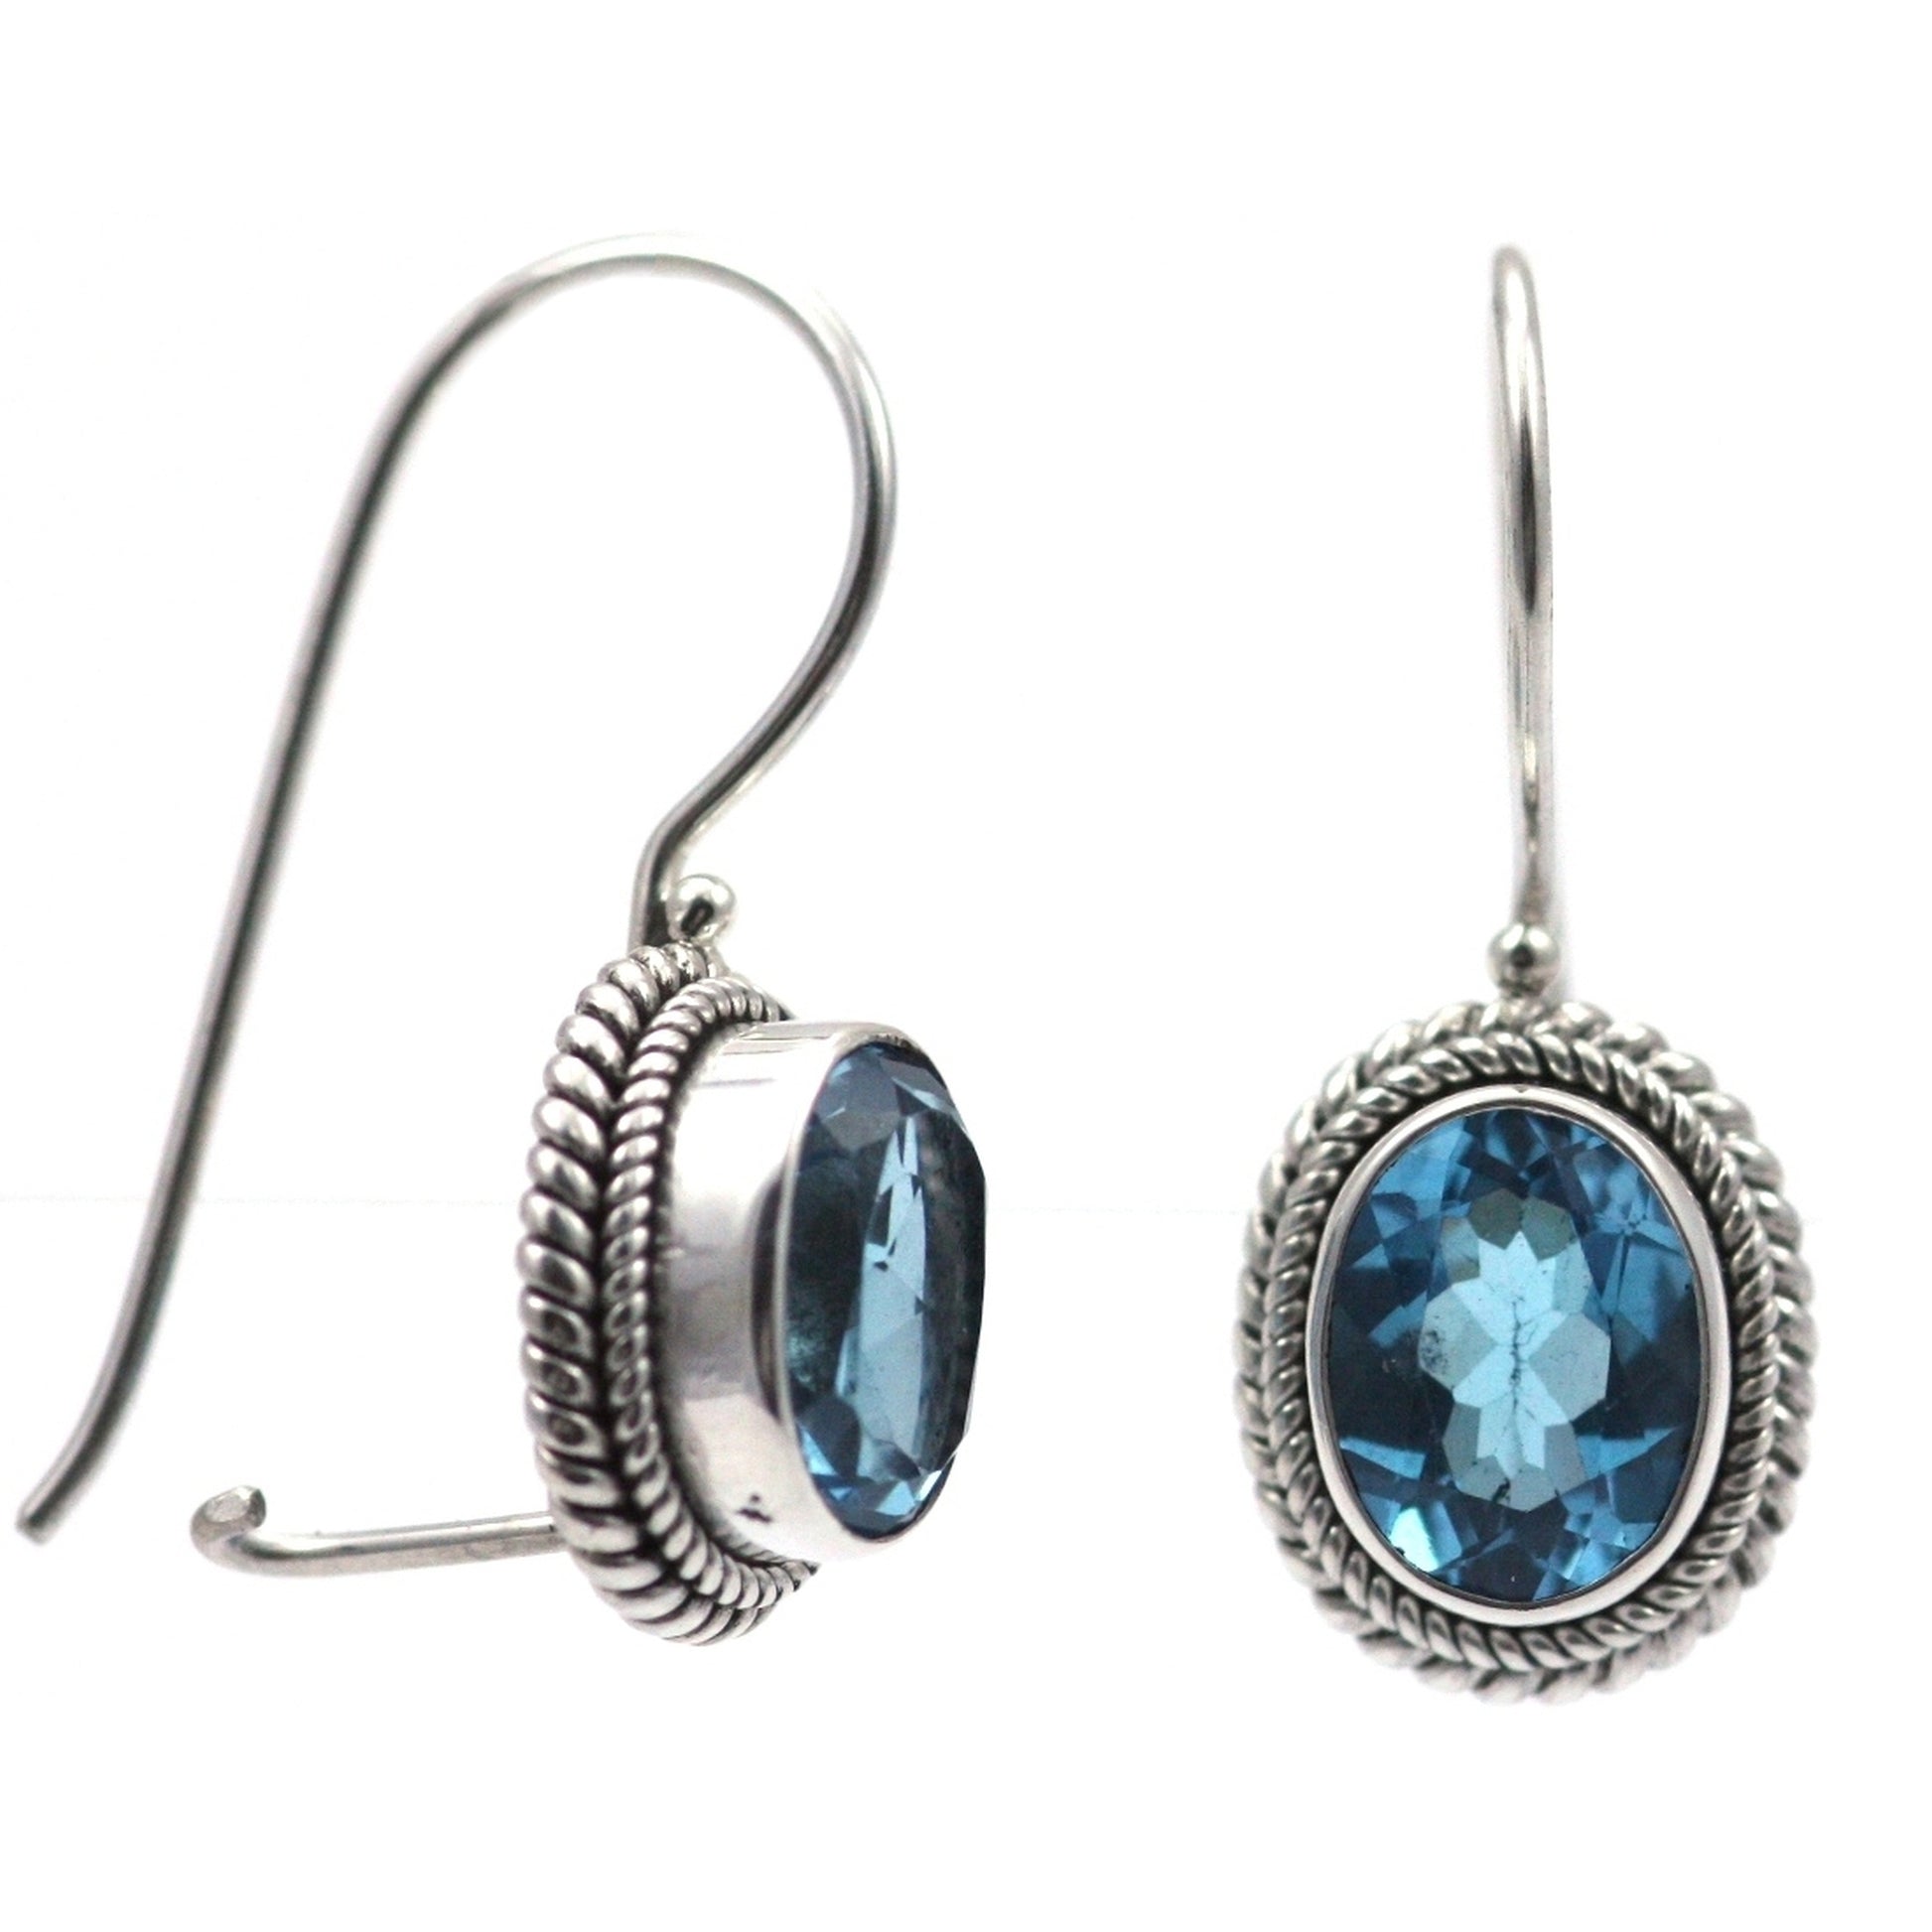 Silver earrings with rope trim and oval blue topaz gemstones.